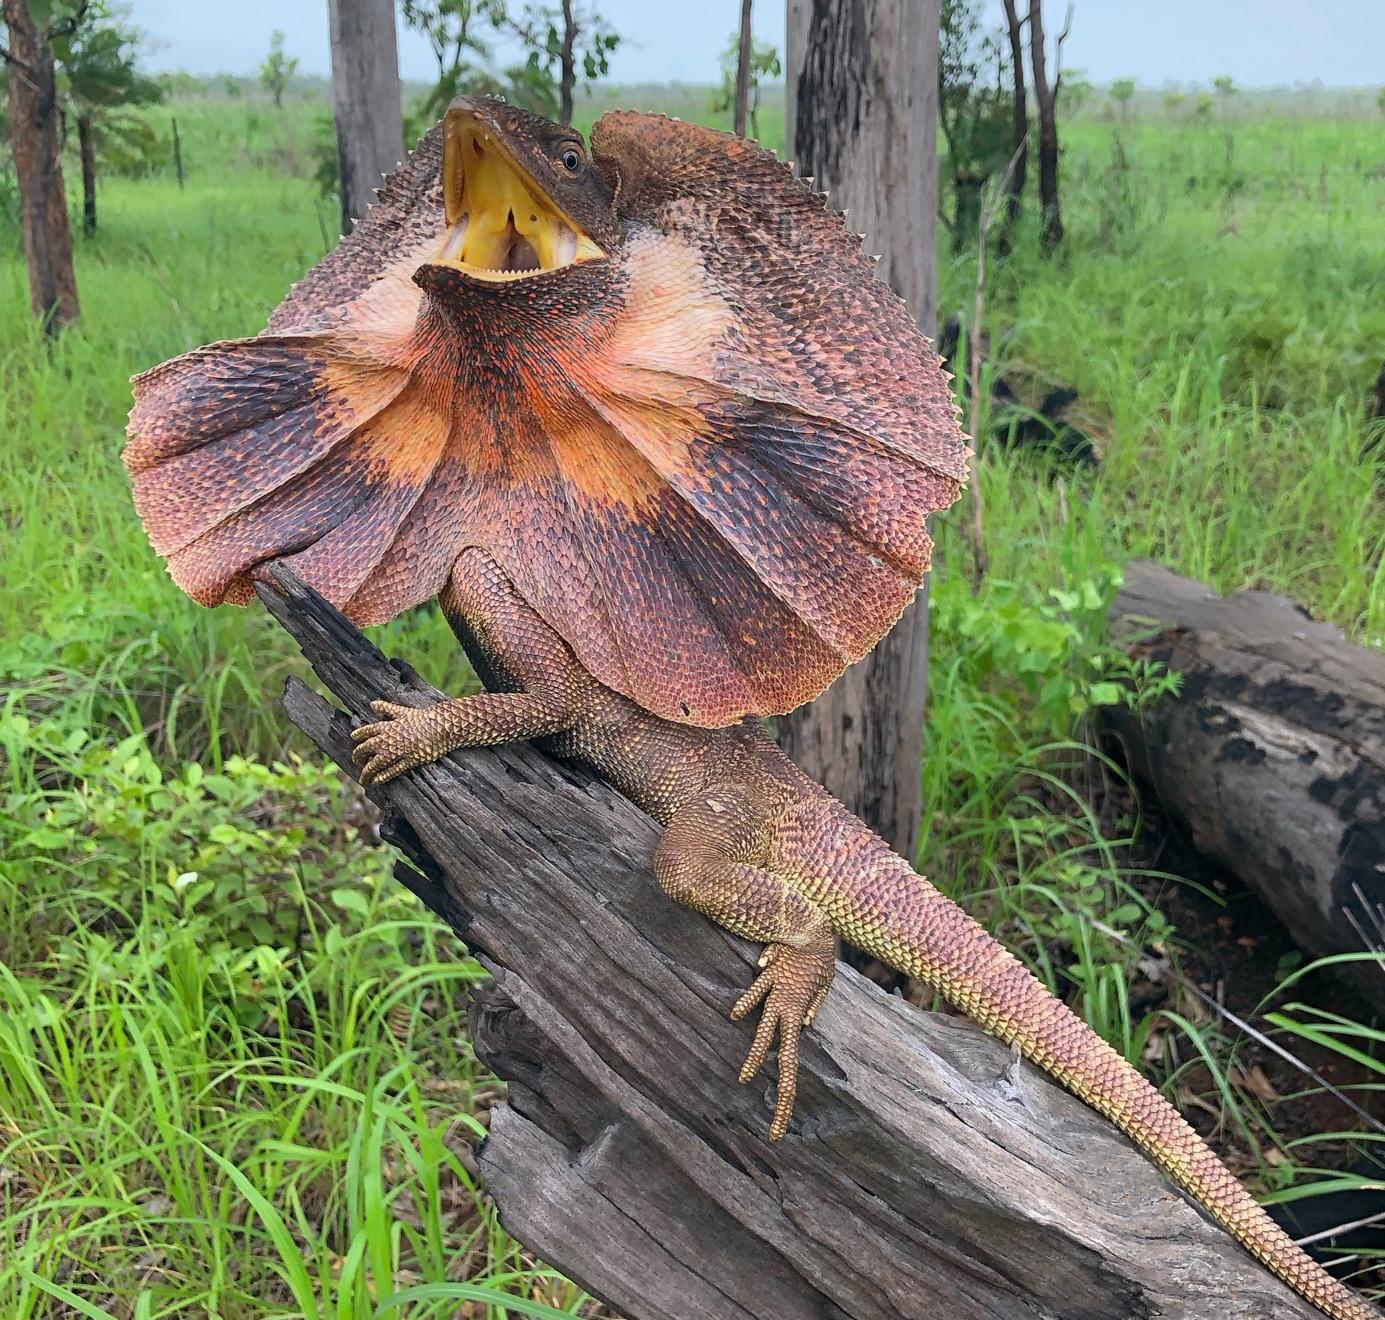 Frilled lizard rests on a fallen log with bright green grass behind and a grey sky in the background.